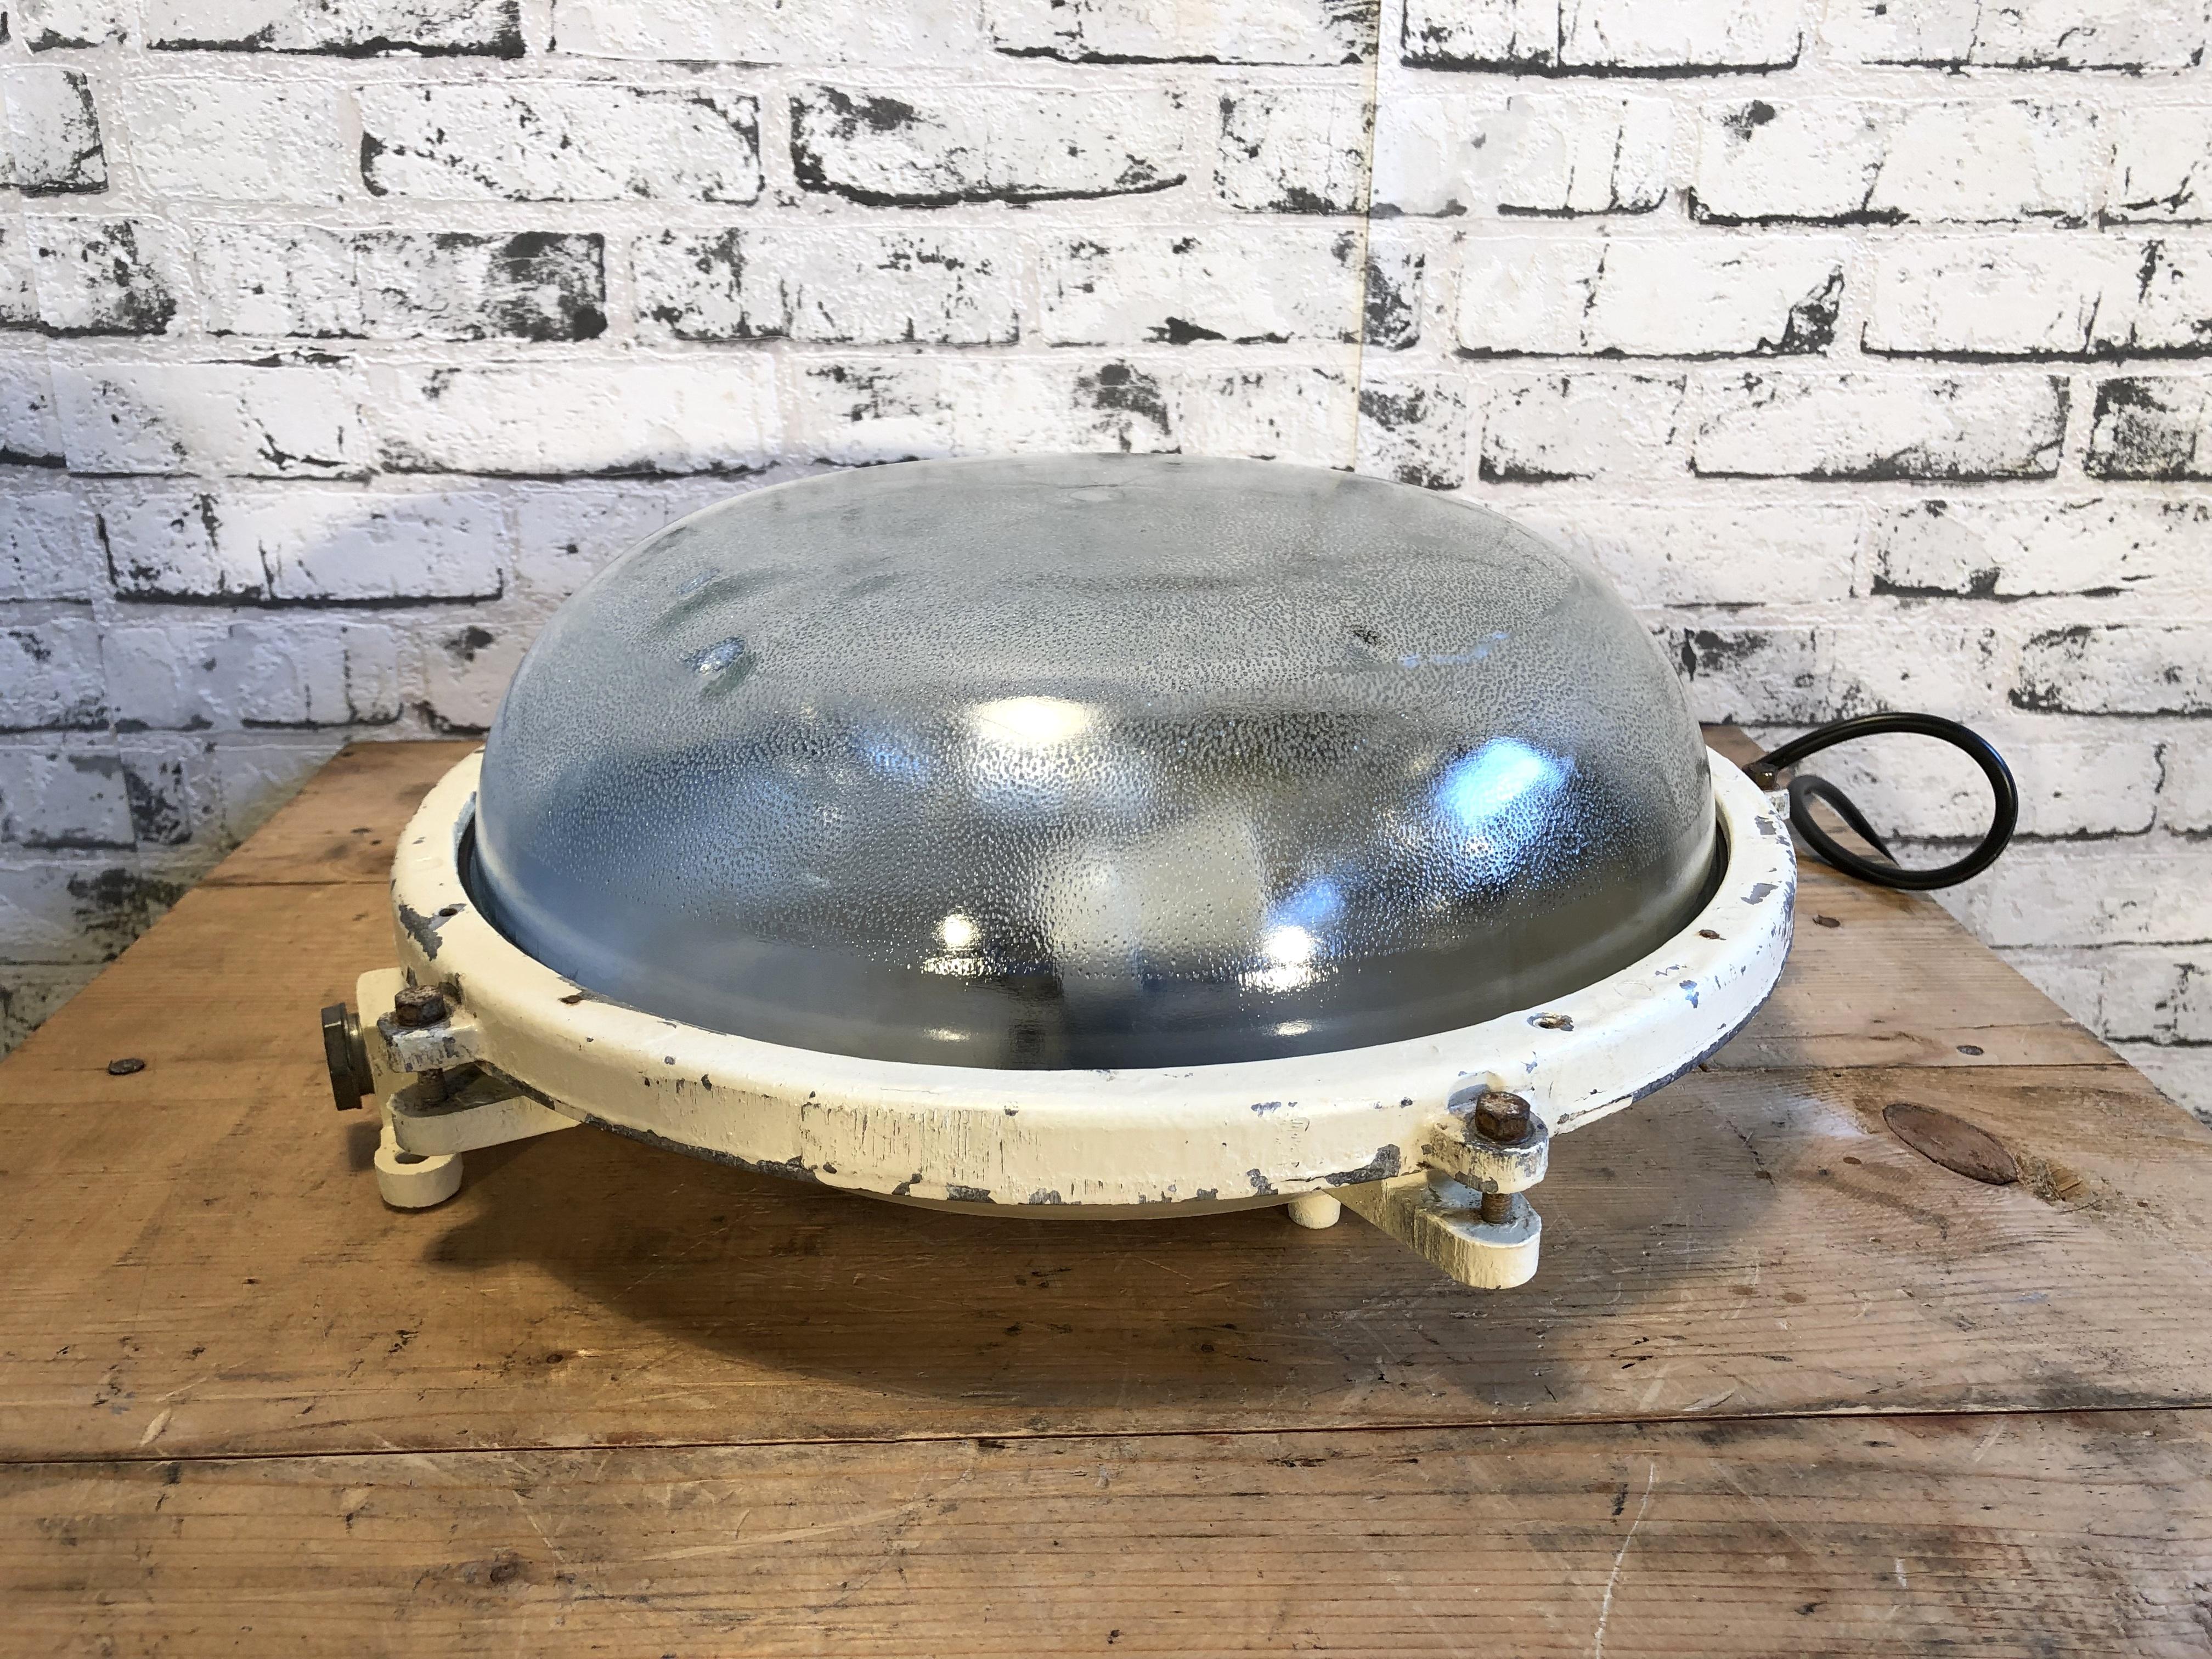 This cast aluminium wall lamp was made by Elektrosvit in former Czechoslovakia during the 1970s. It features cast aluminium body and a frosted curved glass. It can also be used as a ceiling lamp. The lamp has two porcelain sockets for E 27